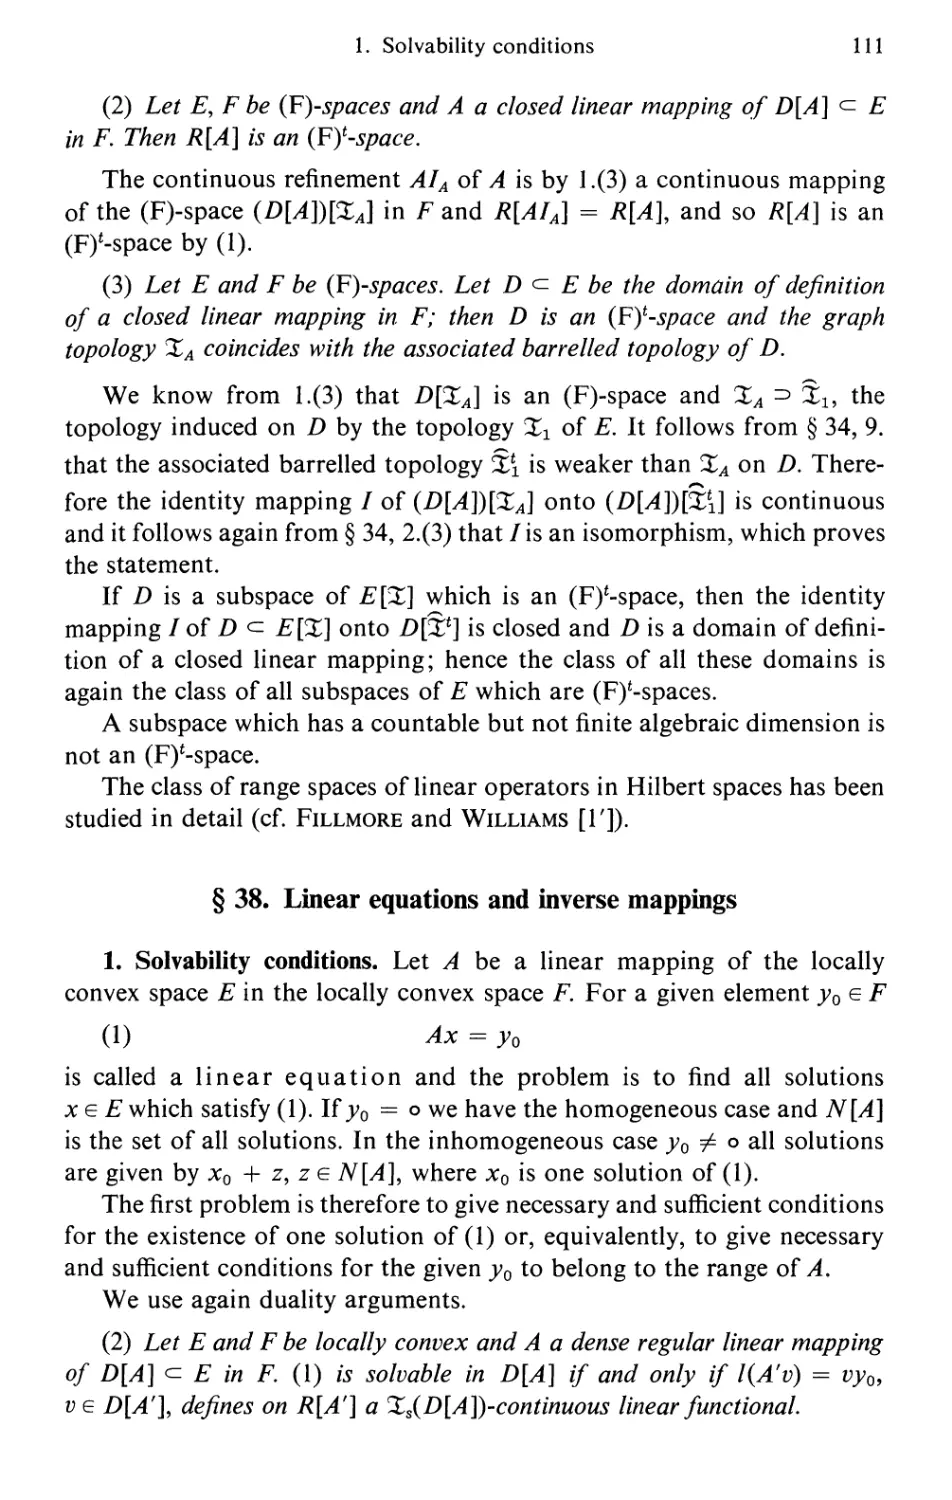 §38. Linear equations and inverse mappings